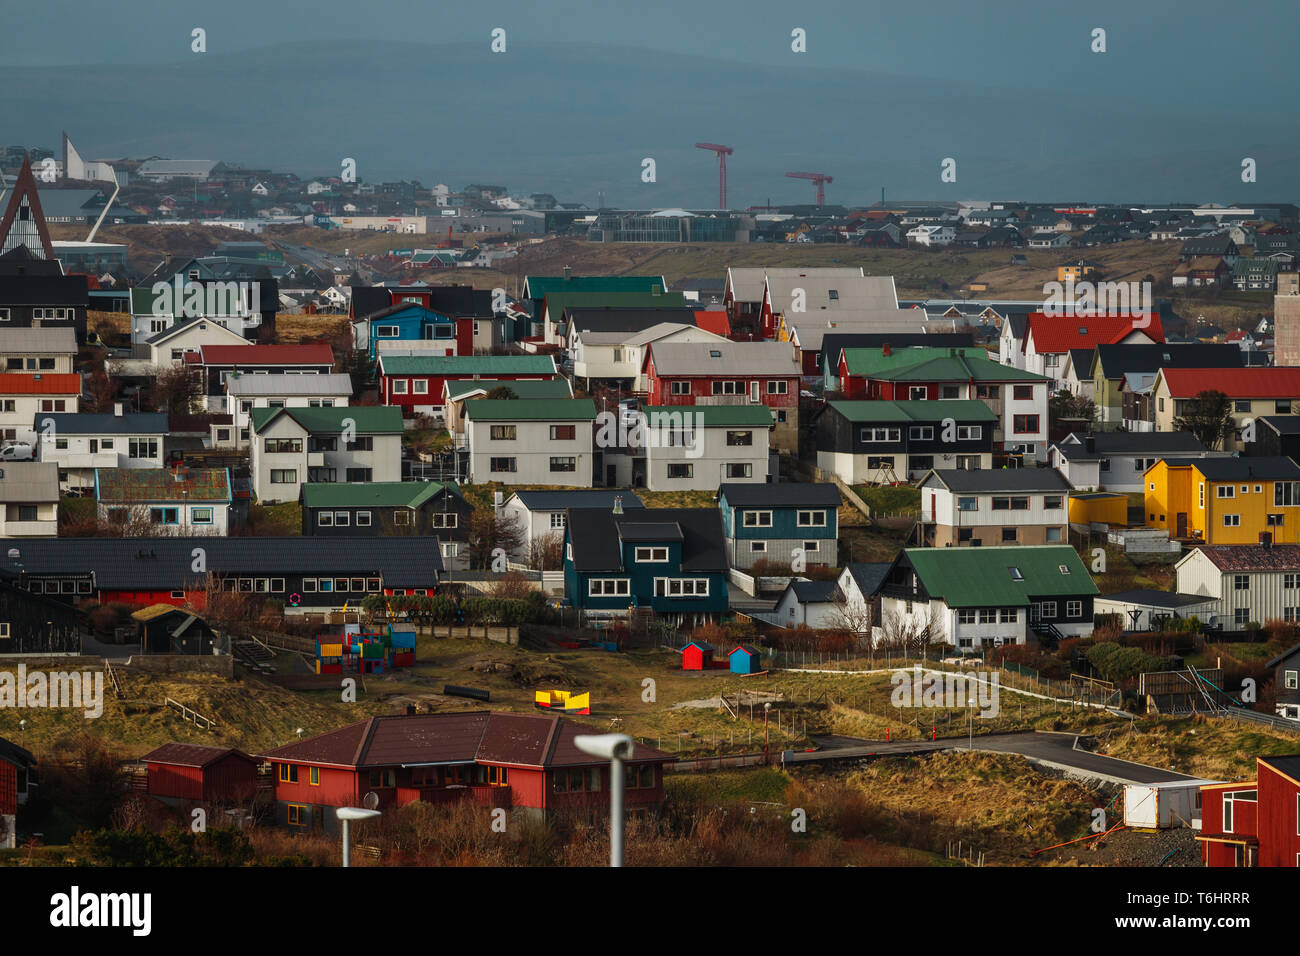 Picturesque colourful houses in the city of Tórshavn, the capital of the Faroe Islands during sunset after heavy rain (Faroe Islands, Denmark, Europe) Stock Photo